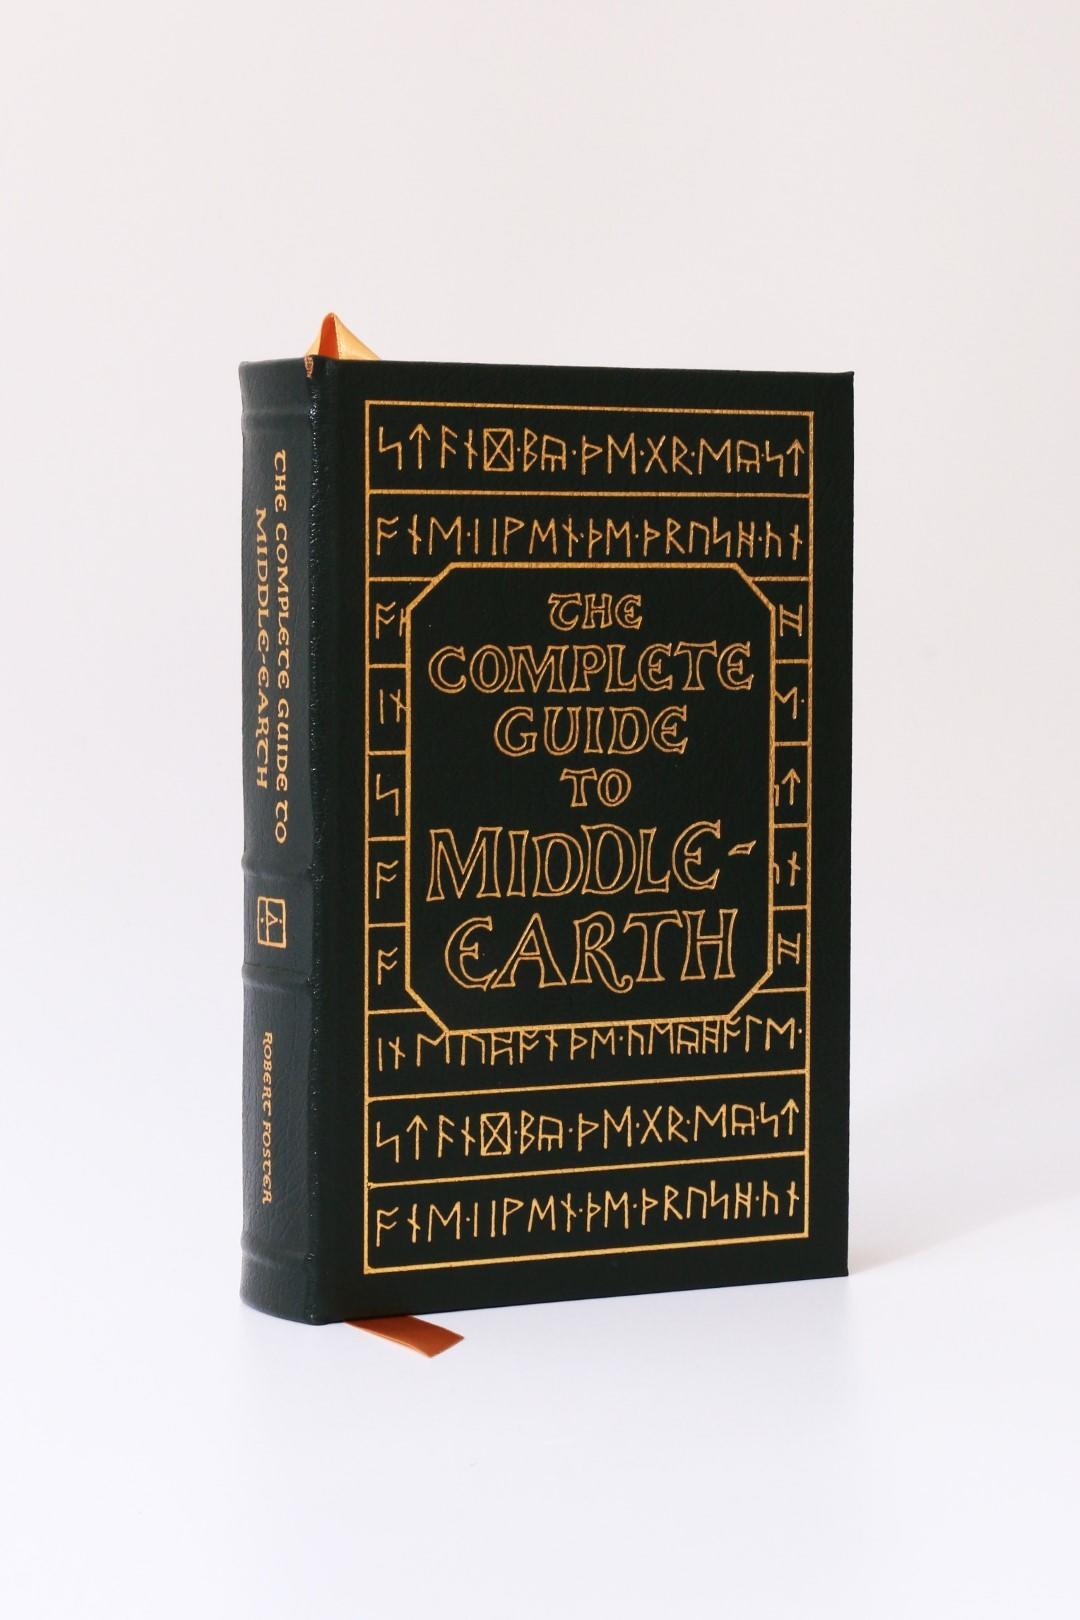 Robert Foster [Tolkien Interest] - The Complete Guide to Middle-Earth - Easton Press, 2003, First Thus.